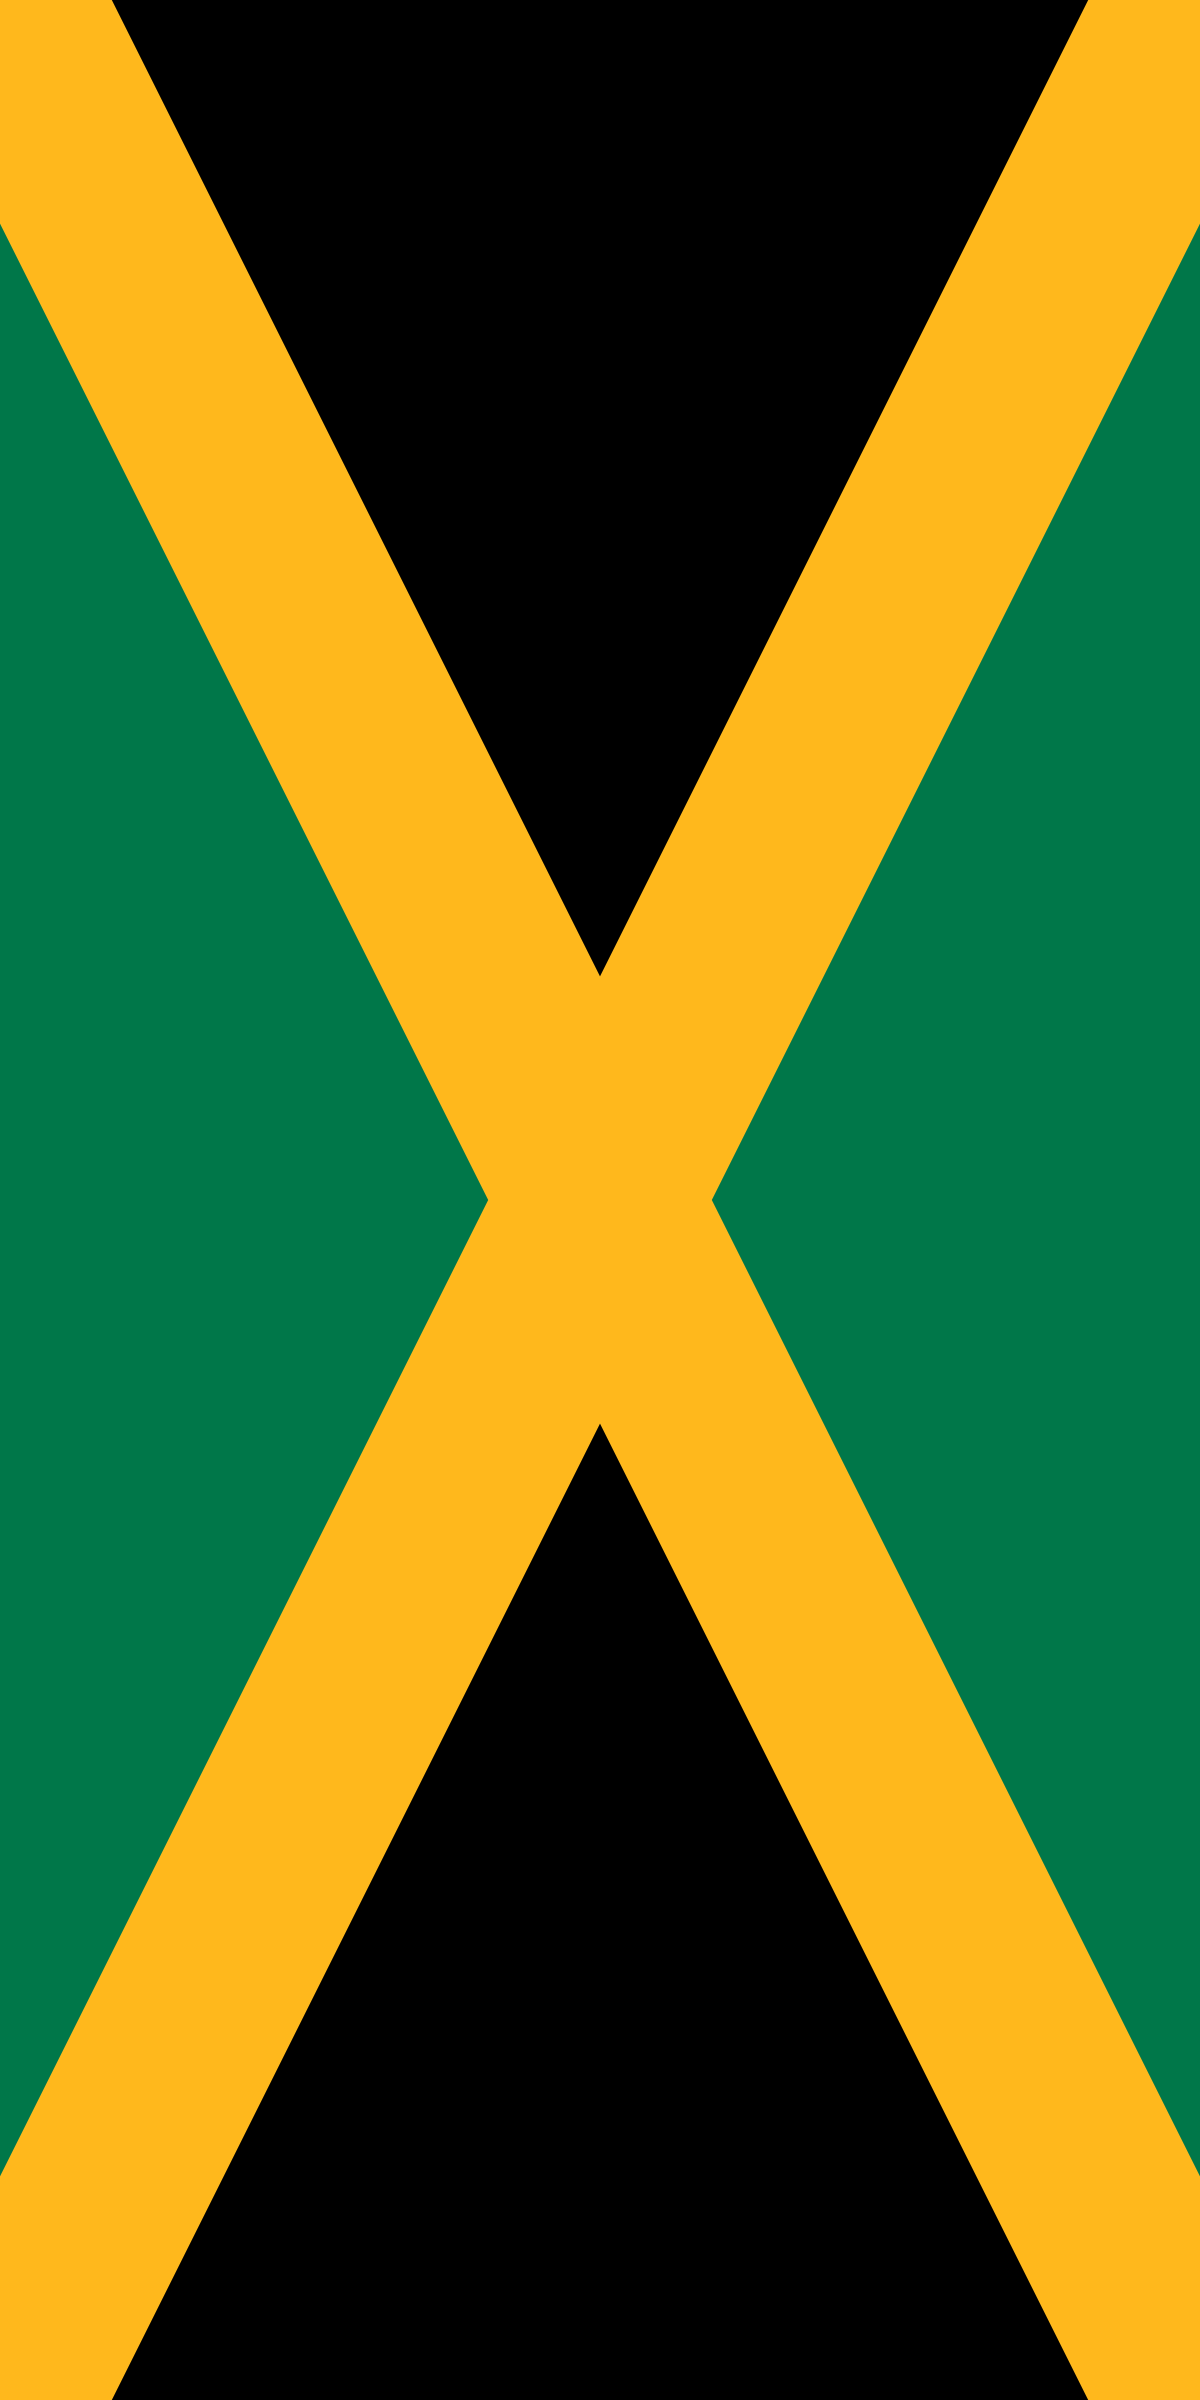 Download File:Flag of Jamaica, vertical.svg - Wikimedia Commons